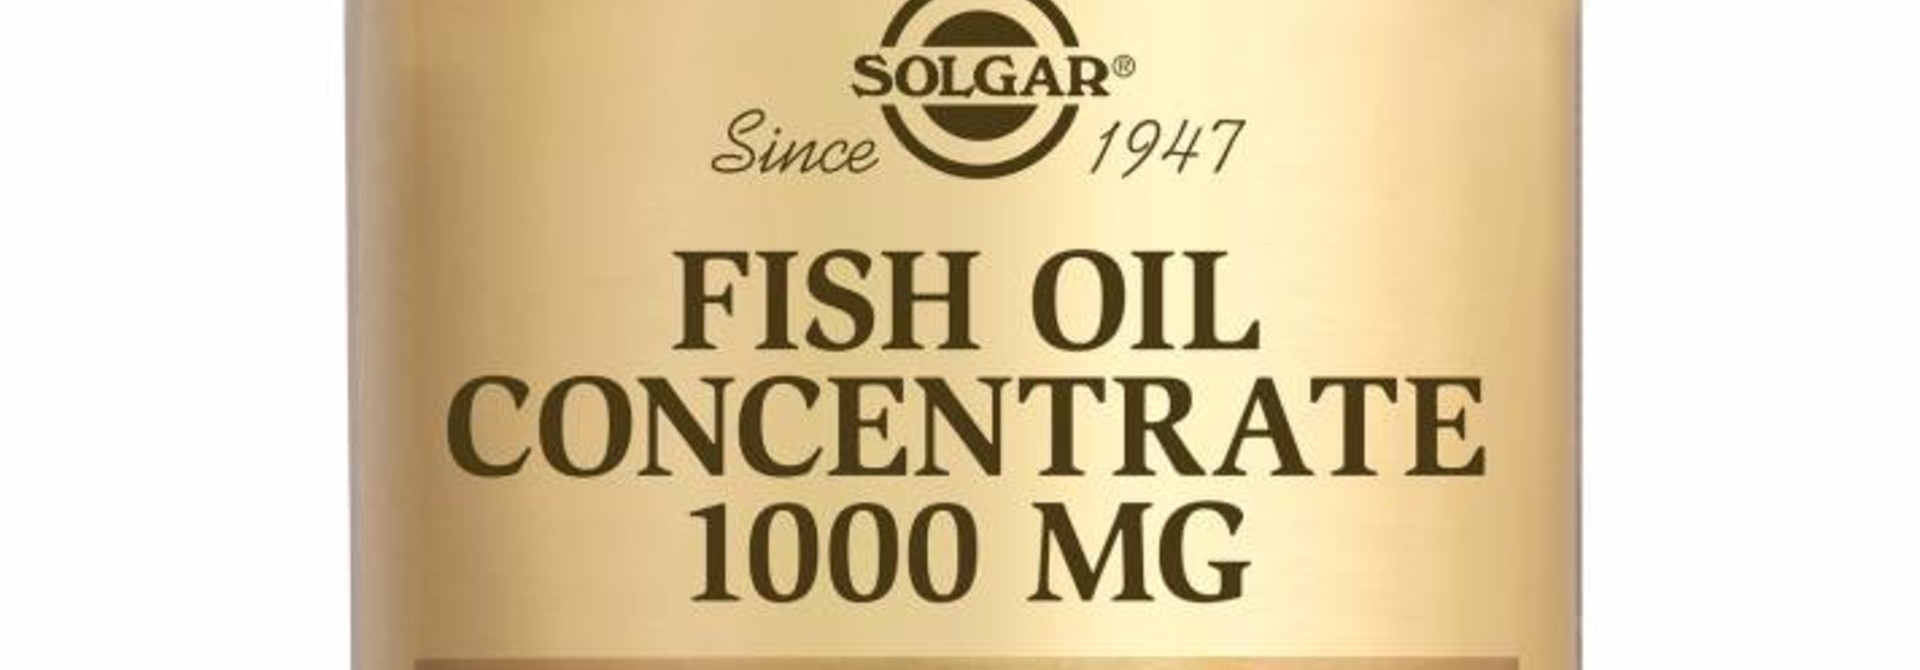 Fish Oil Concentrate 1000 mg 60 softgels